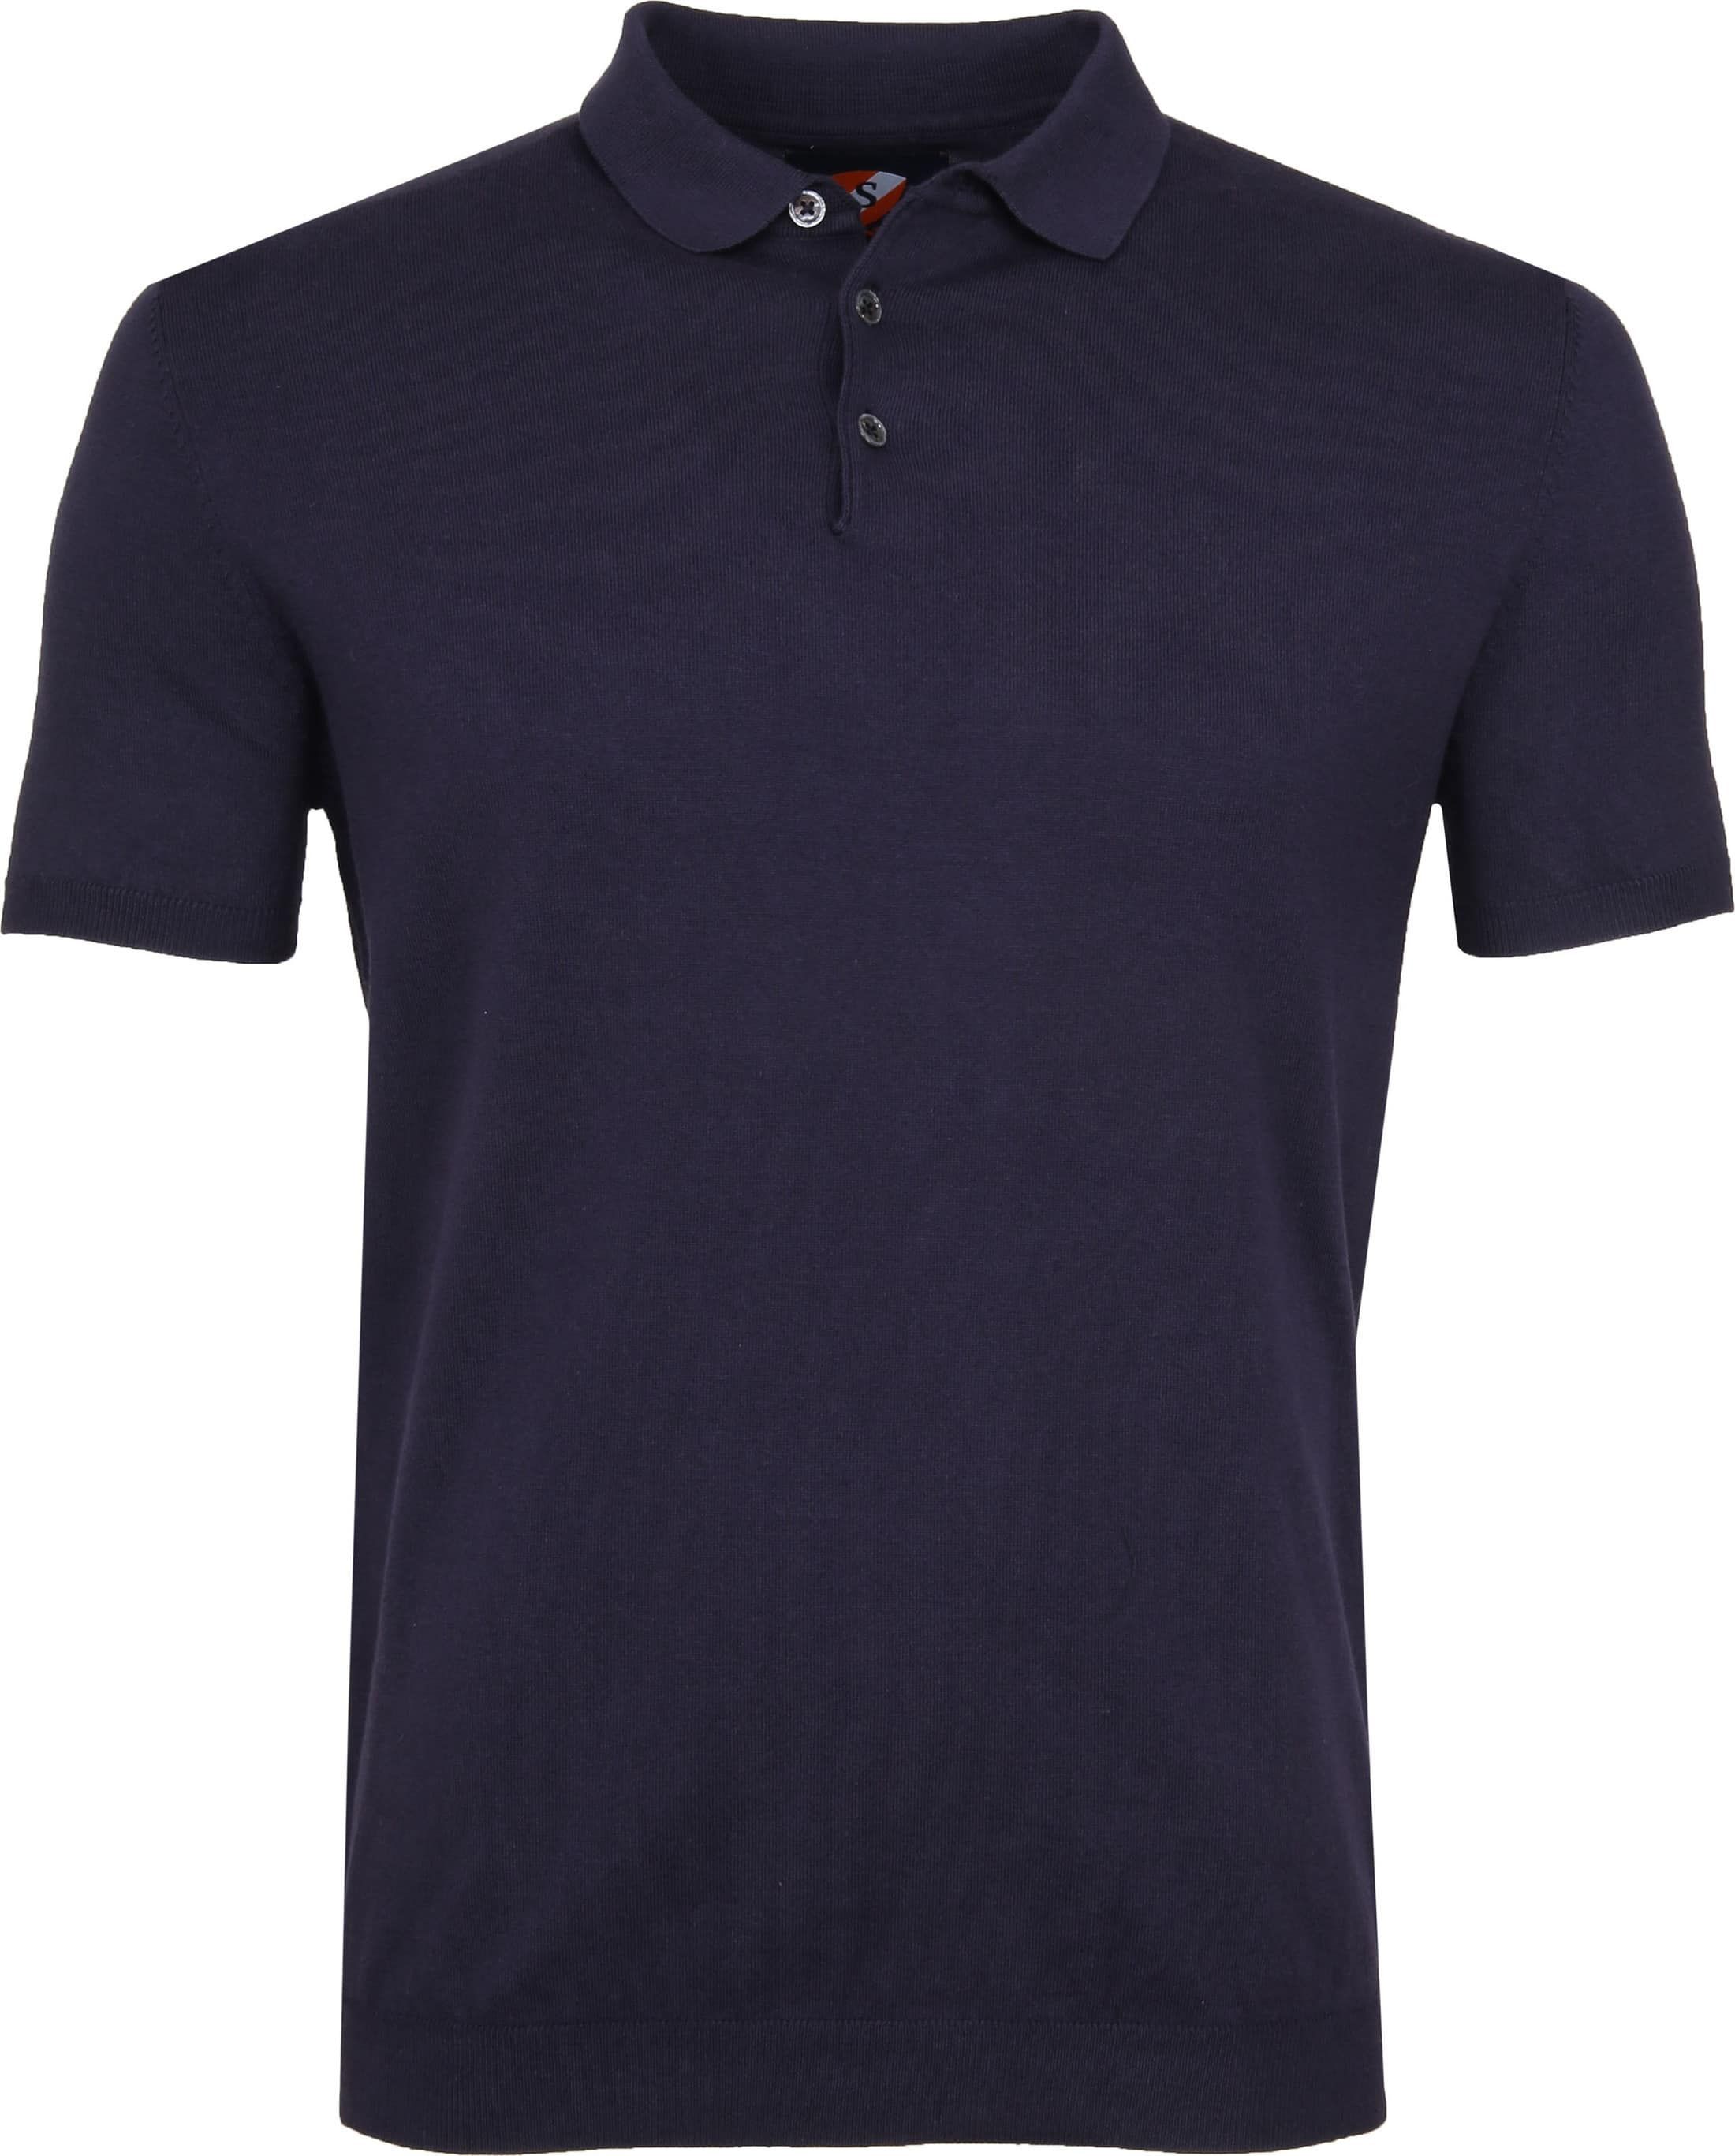 Suitable Mars Polo Shirt Stretch Navy Dark Blue Blue size S